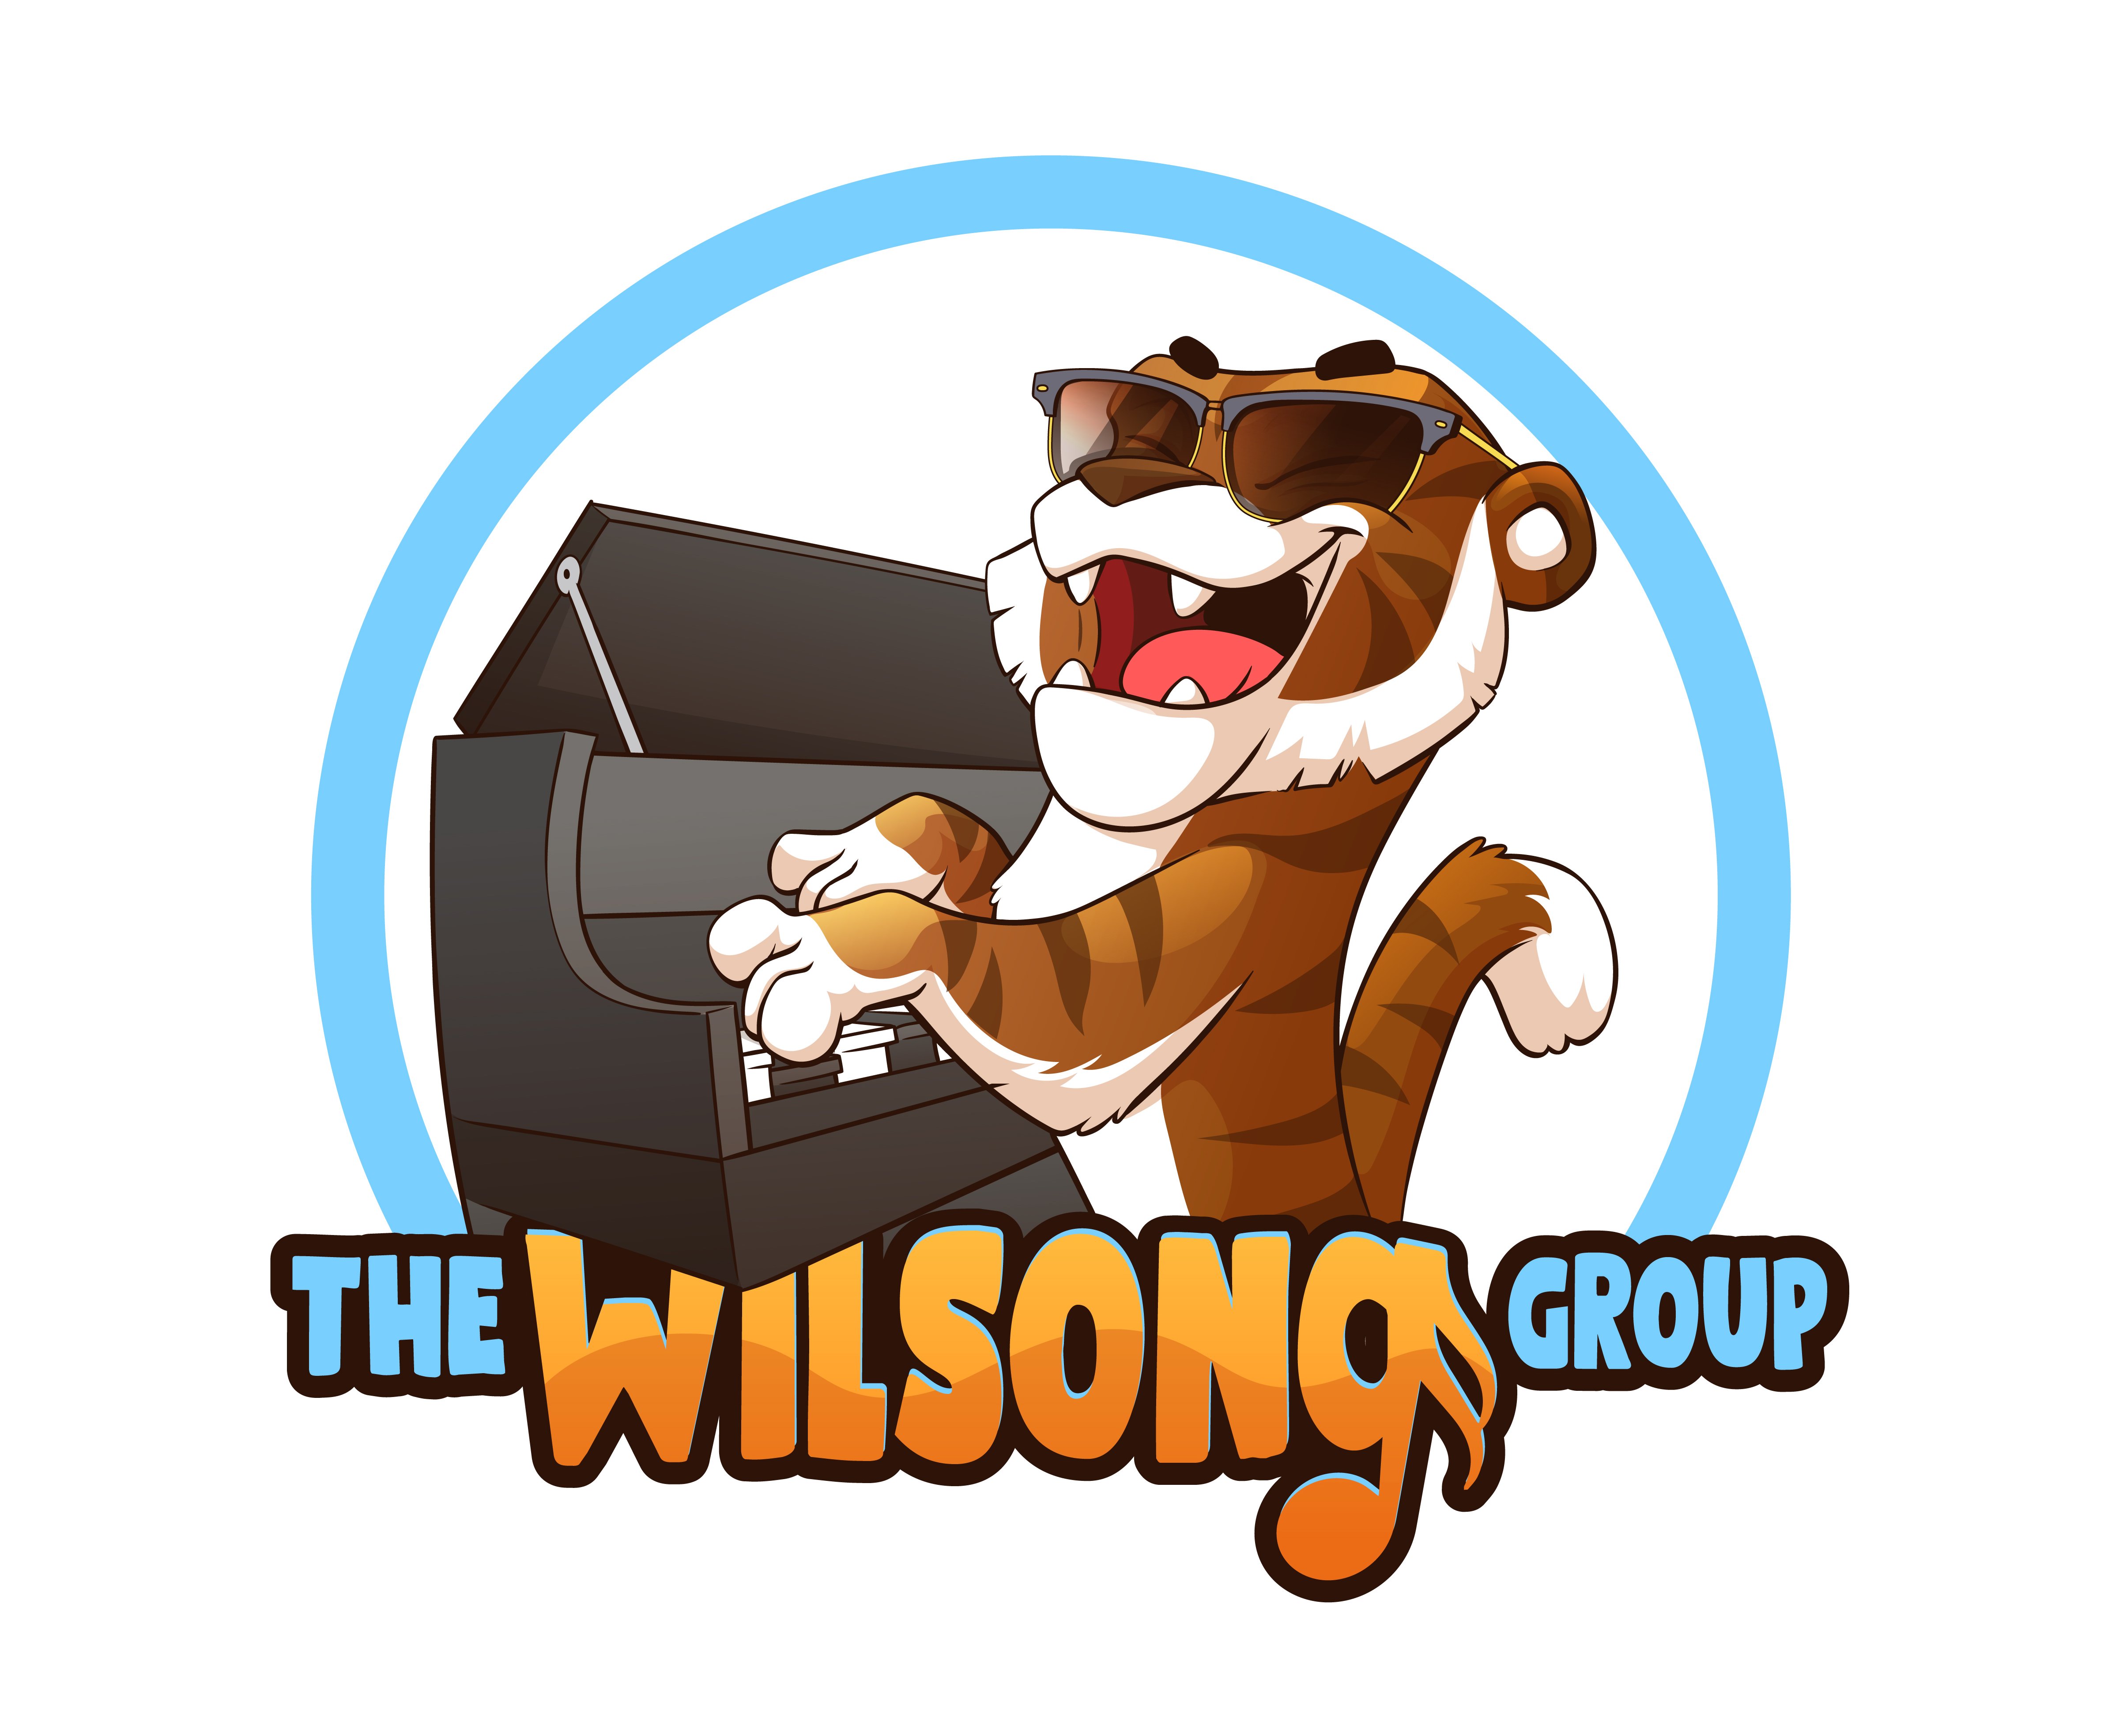  THE WILSONG GROUP